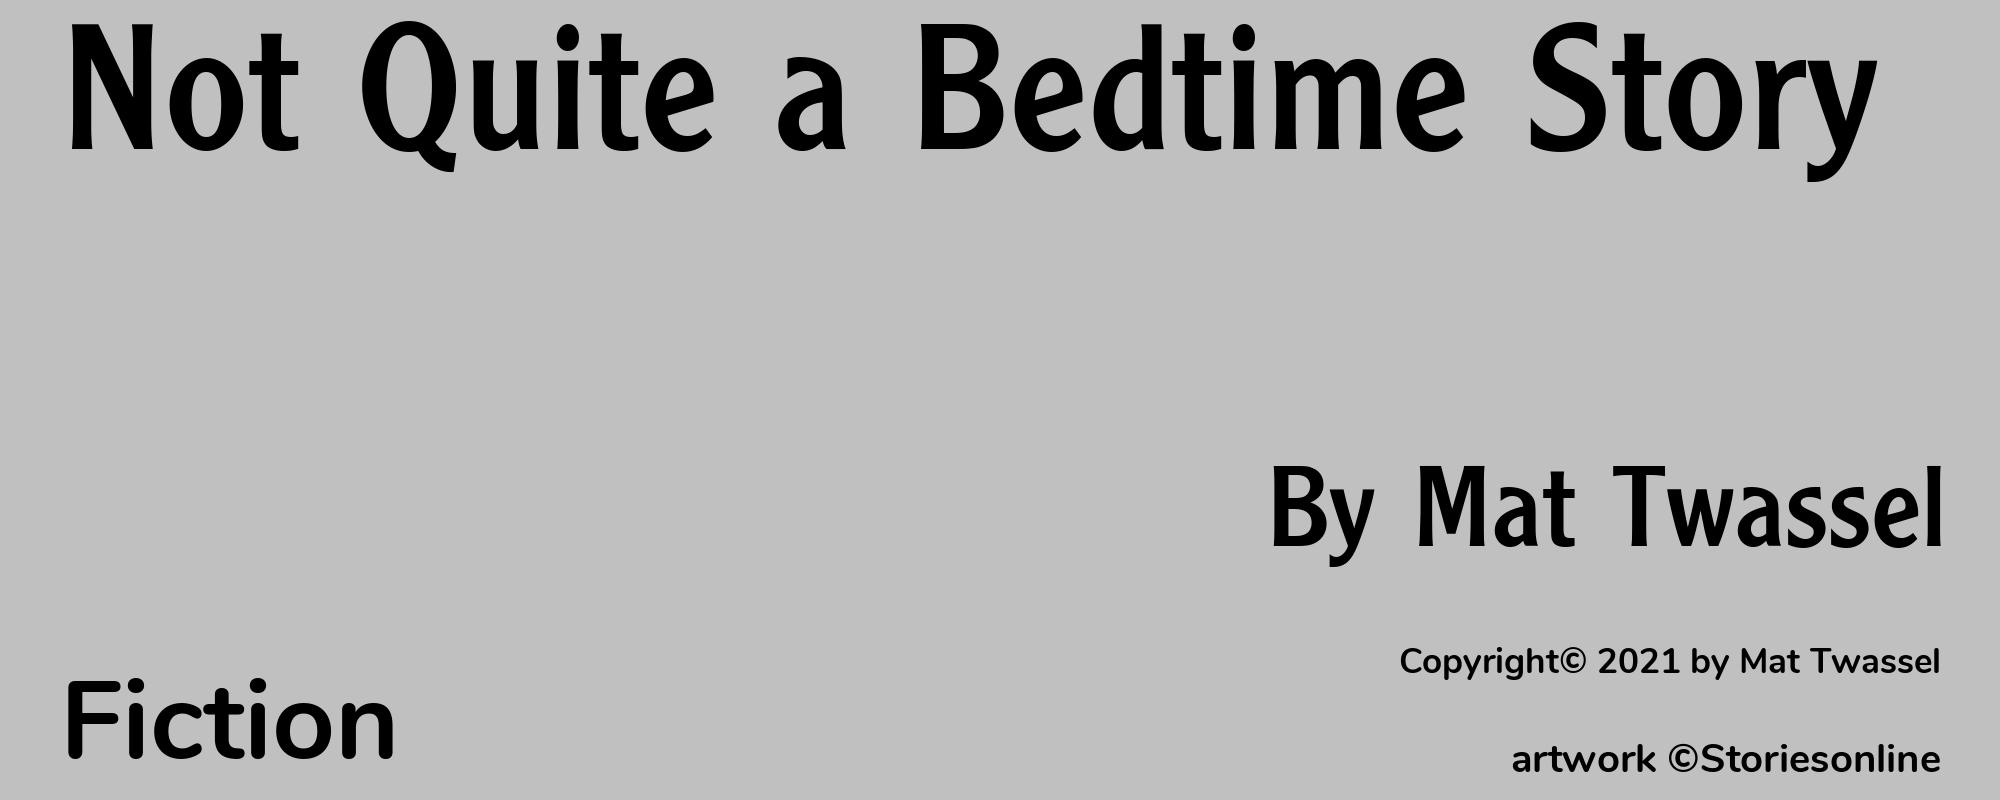 Not Quite a Bedtime Story - Cover